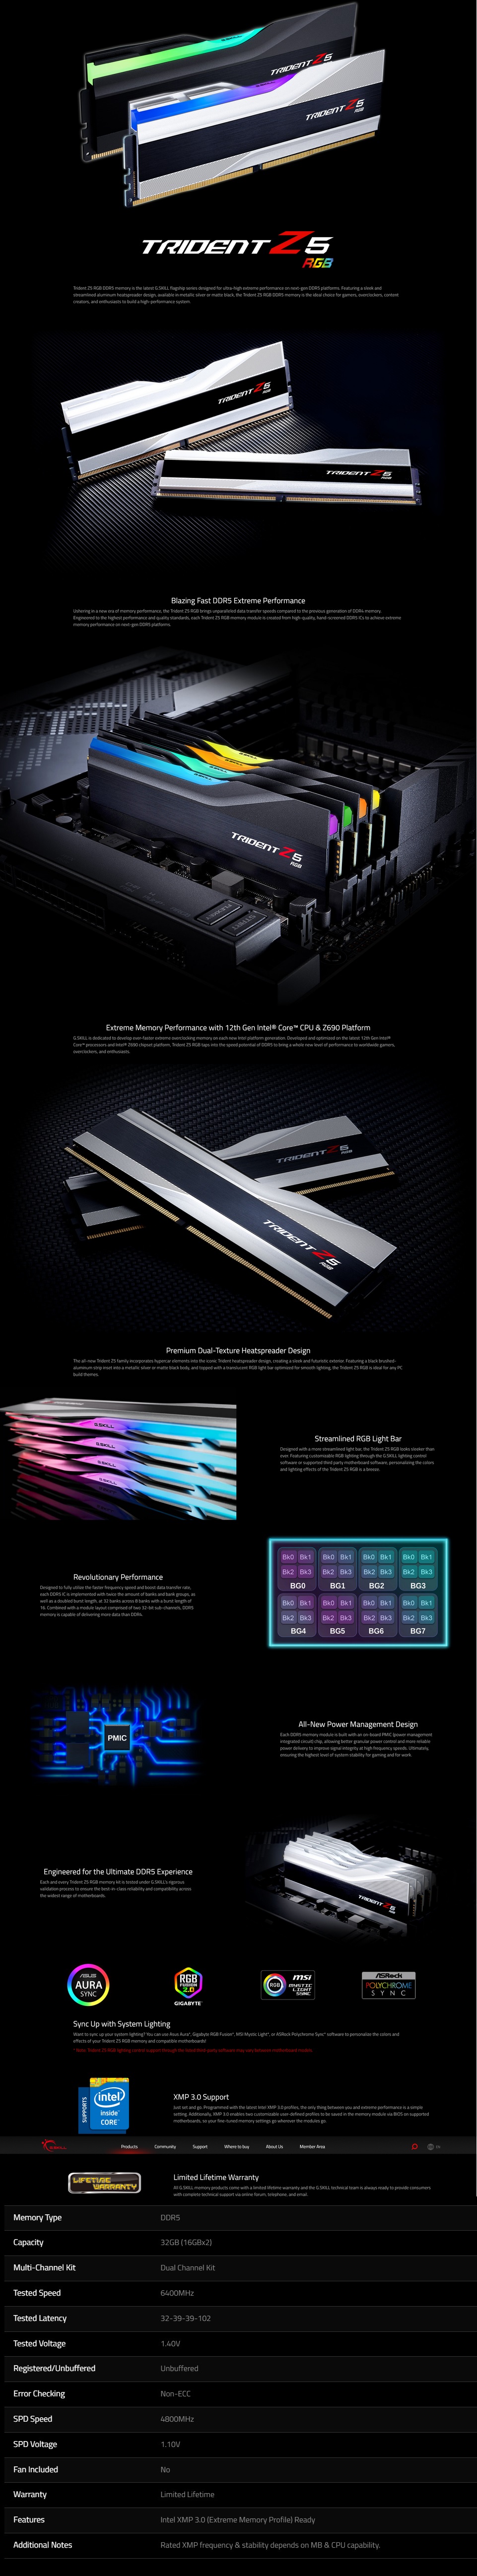 A large marketing image providing additional information about the product G.Skill 32GB Kit (2x16GB) DDR5 Trident Z5 RGB C32 6400MHz -  Silver - Additional alt info not provided